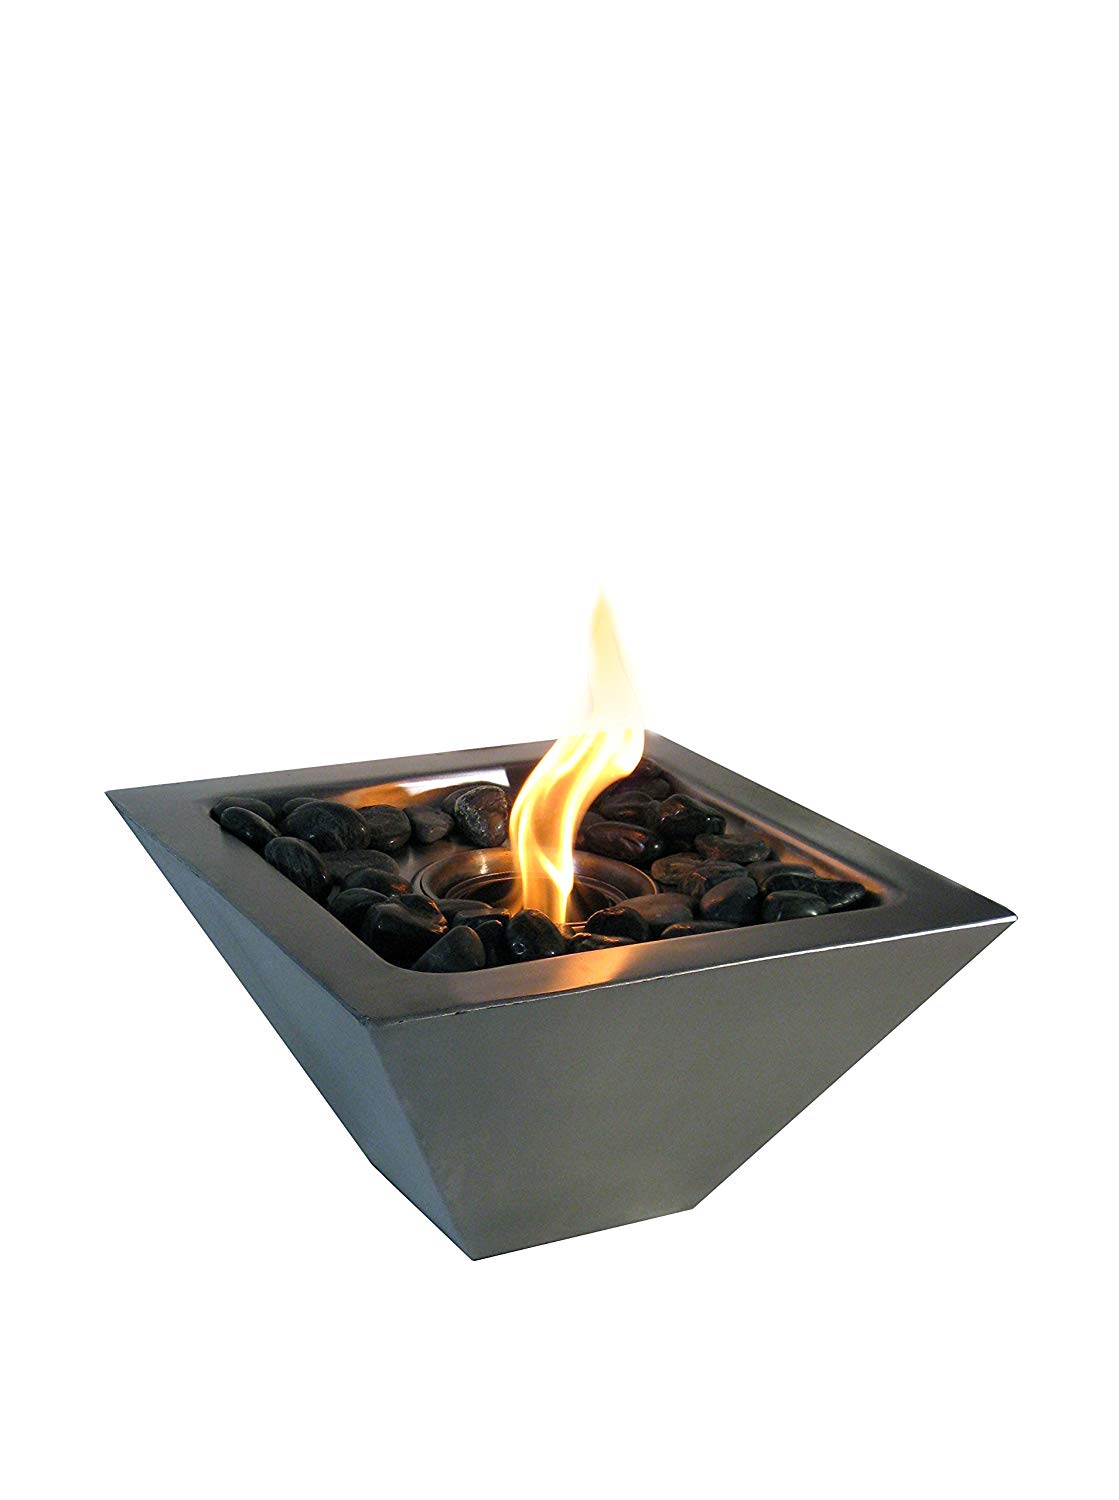 Empire Comfort Systems Fireplace Beautiful Anywhere Fireplace Table top Ethanol Fireplace Brushed Stainless